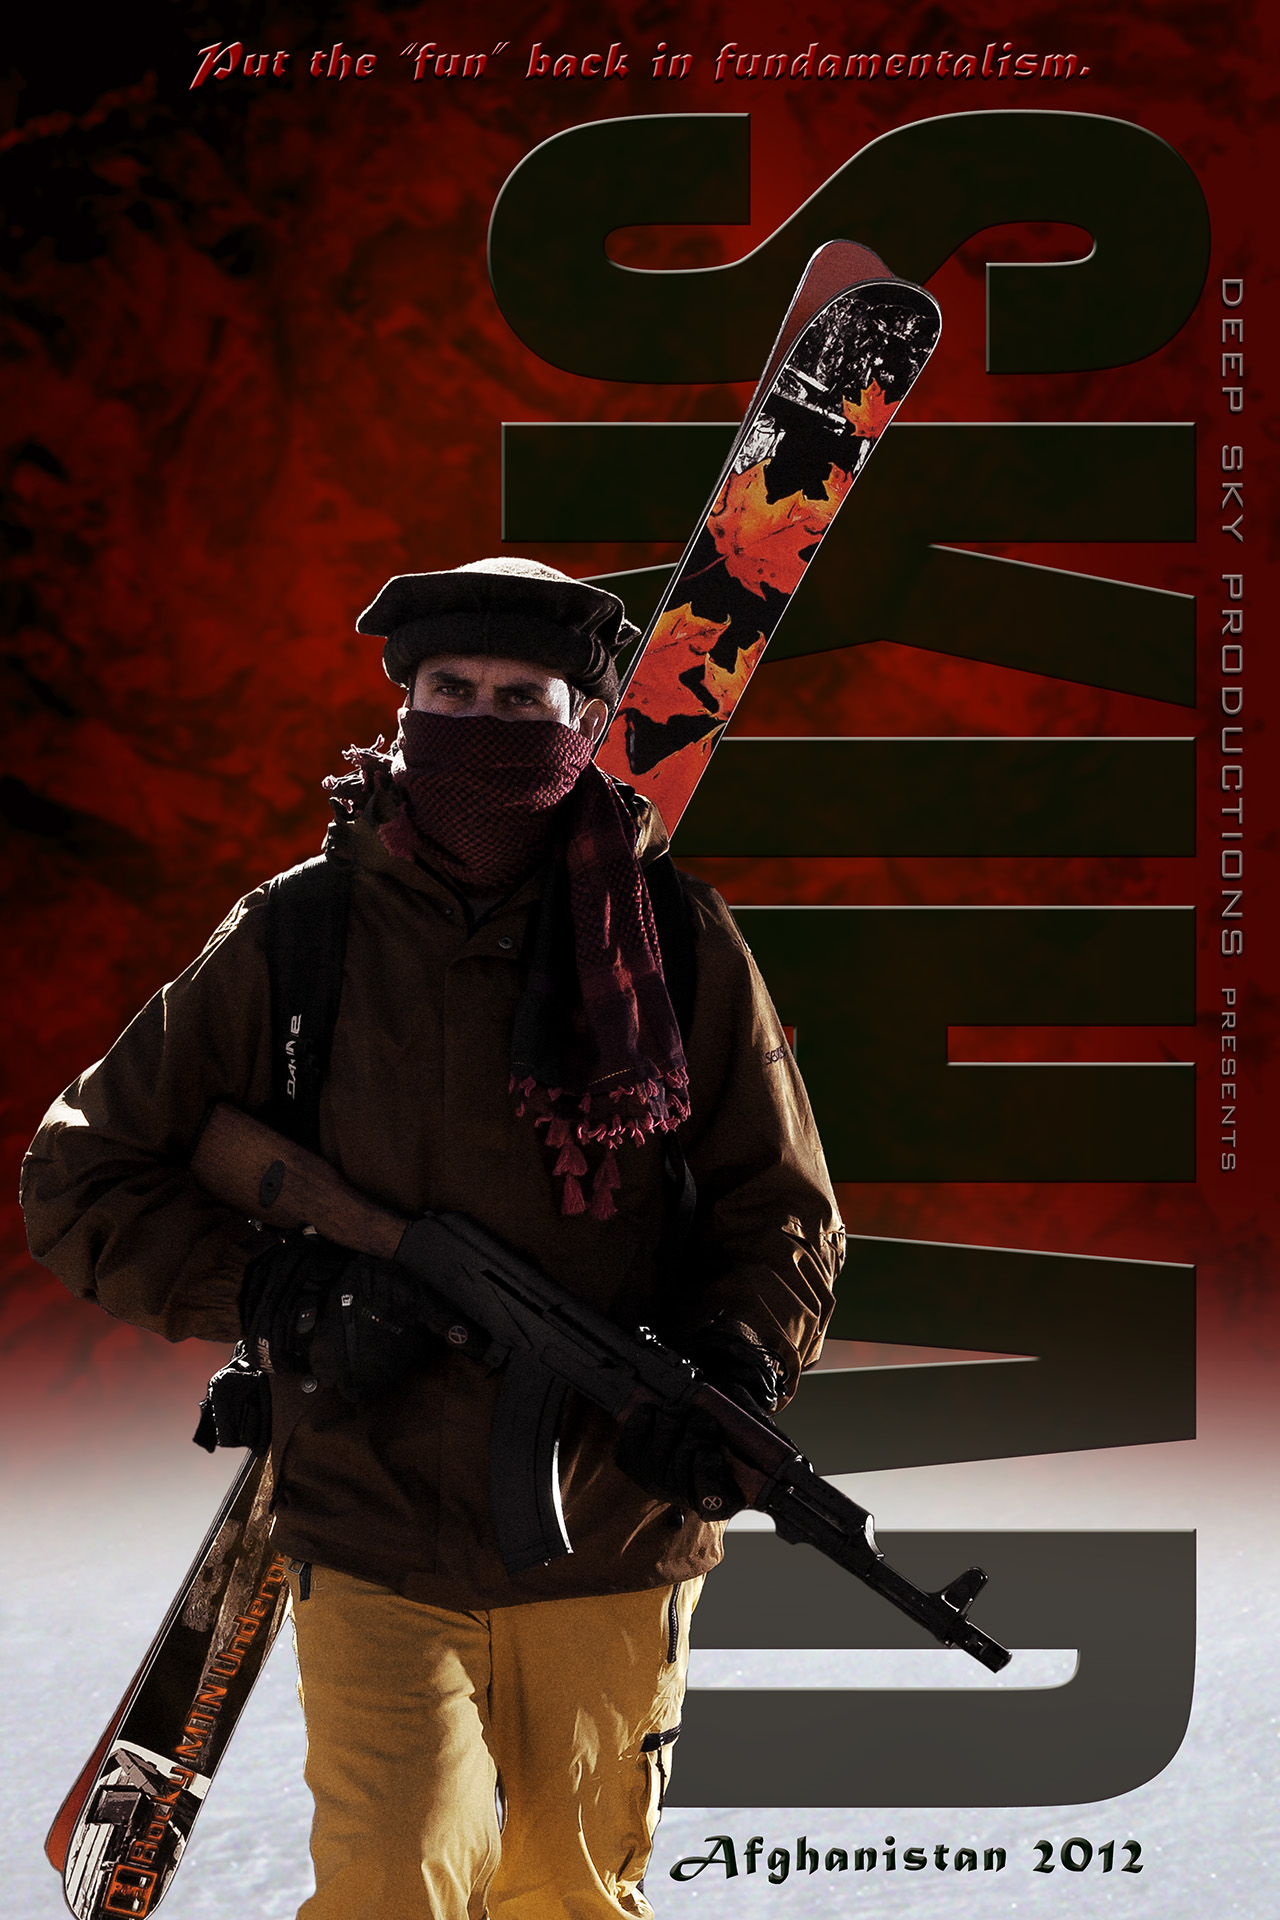 Poster of the short, Skihad featuring a tribal man on skis with a rifle in his hand and a red background behind him